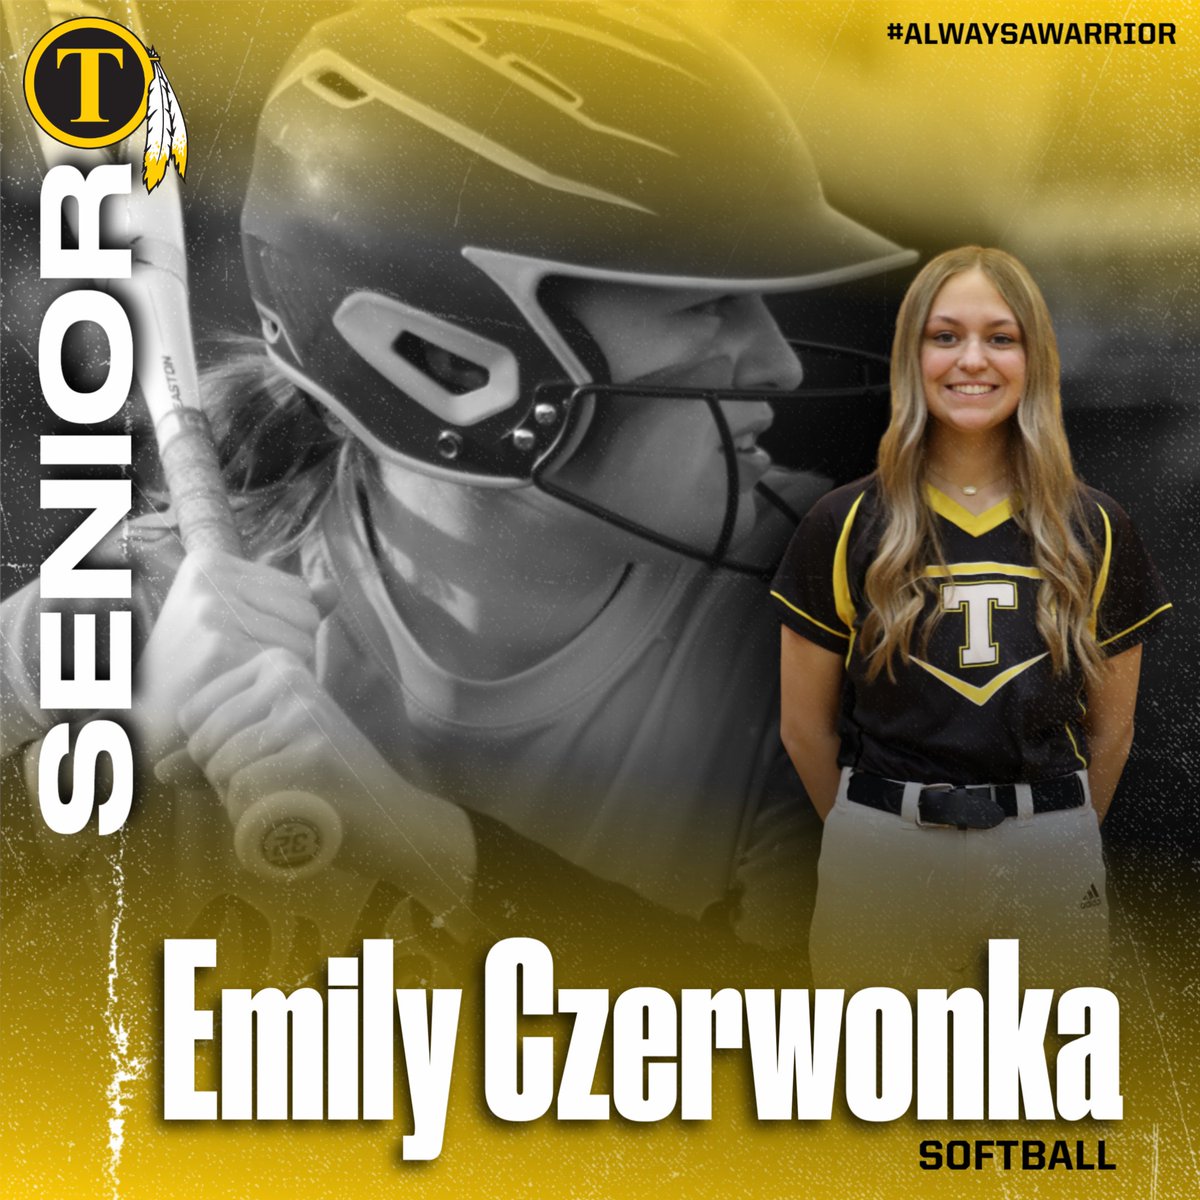 We would like to congratulate Emily Czerwonka, Senior Softball player, on an outstanding career at TCHS and wish her the best of luck!  #SeniorSpotlight #alwaysawarrior